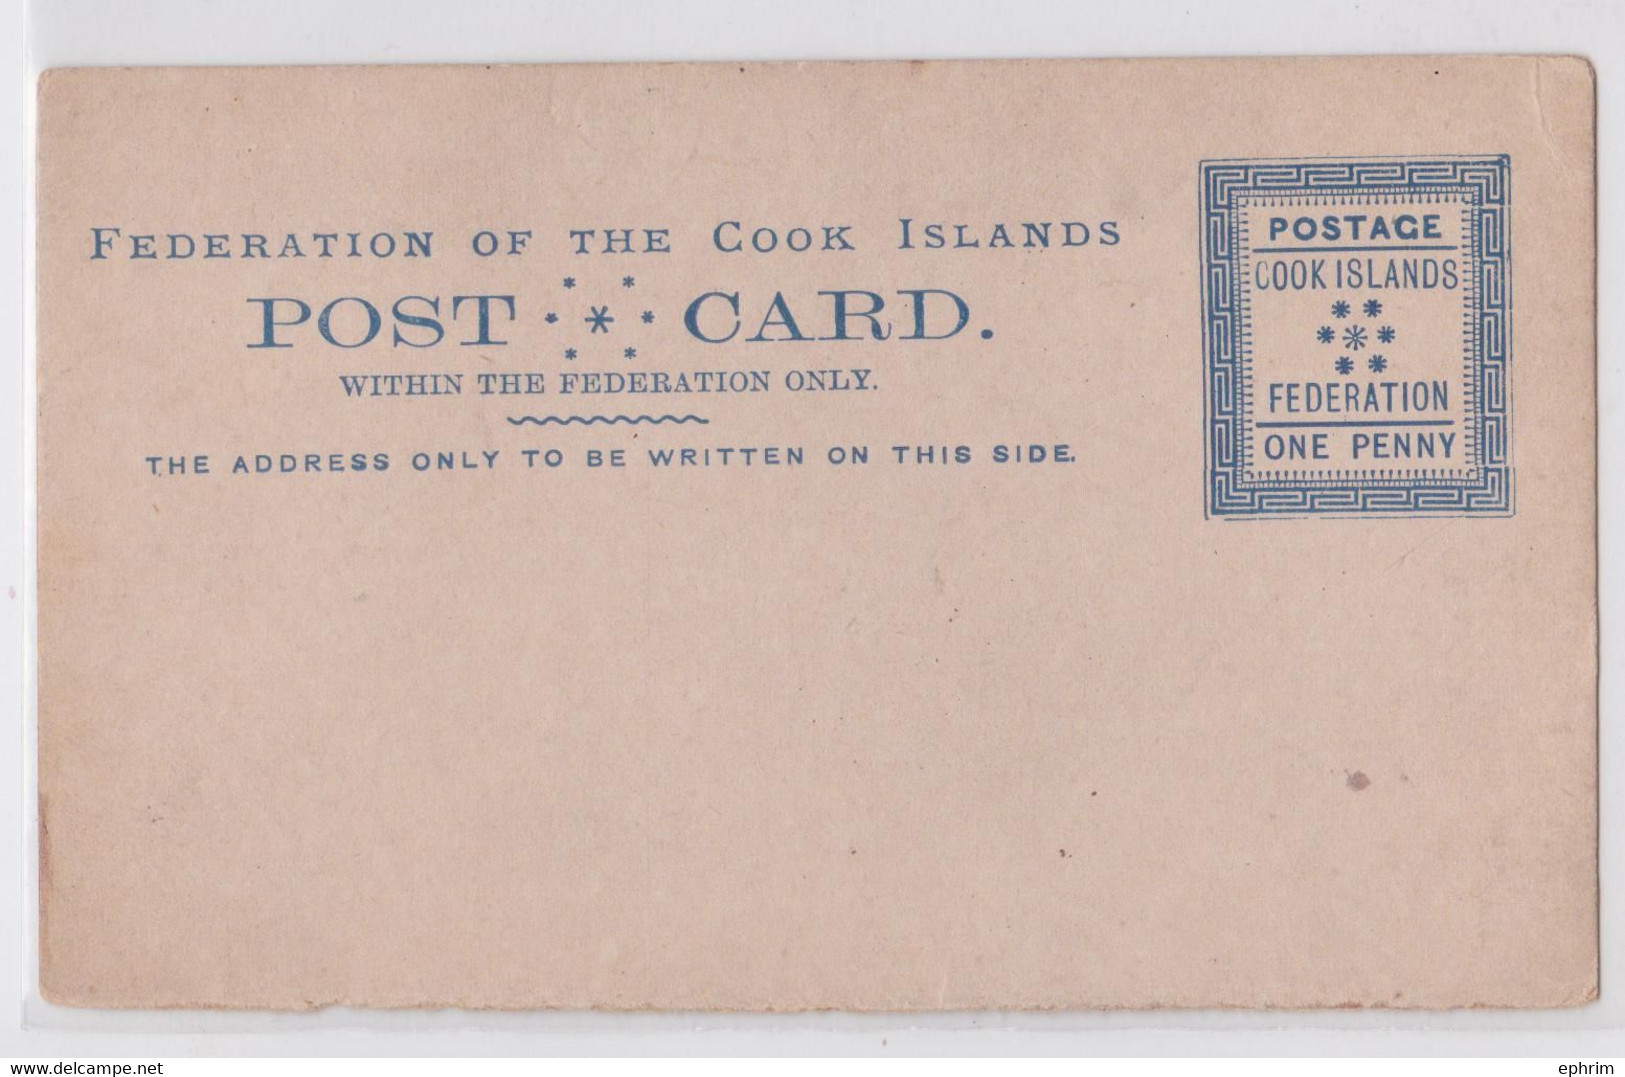 COOK ISLANDS FEDERATION ONE PENNY POSTAL STATIONERY POST CARD ENTIER CARTE POSTALE ÎLES COOK PS EP - Cookinseln